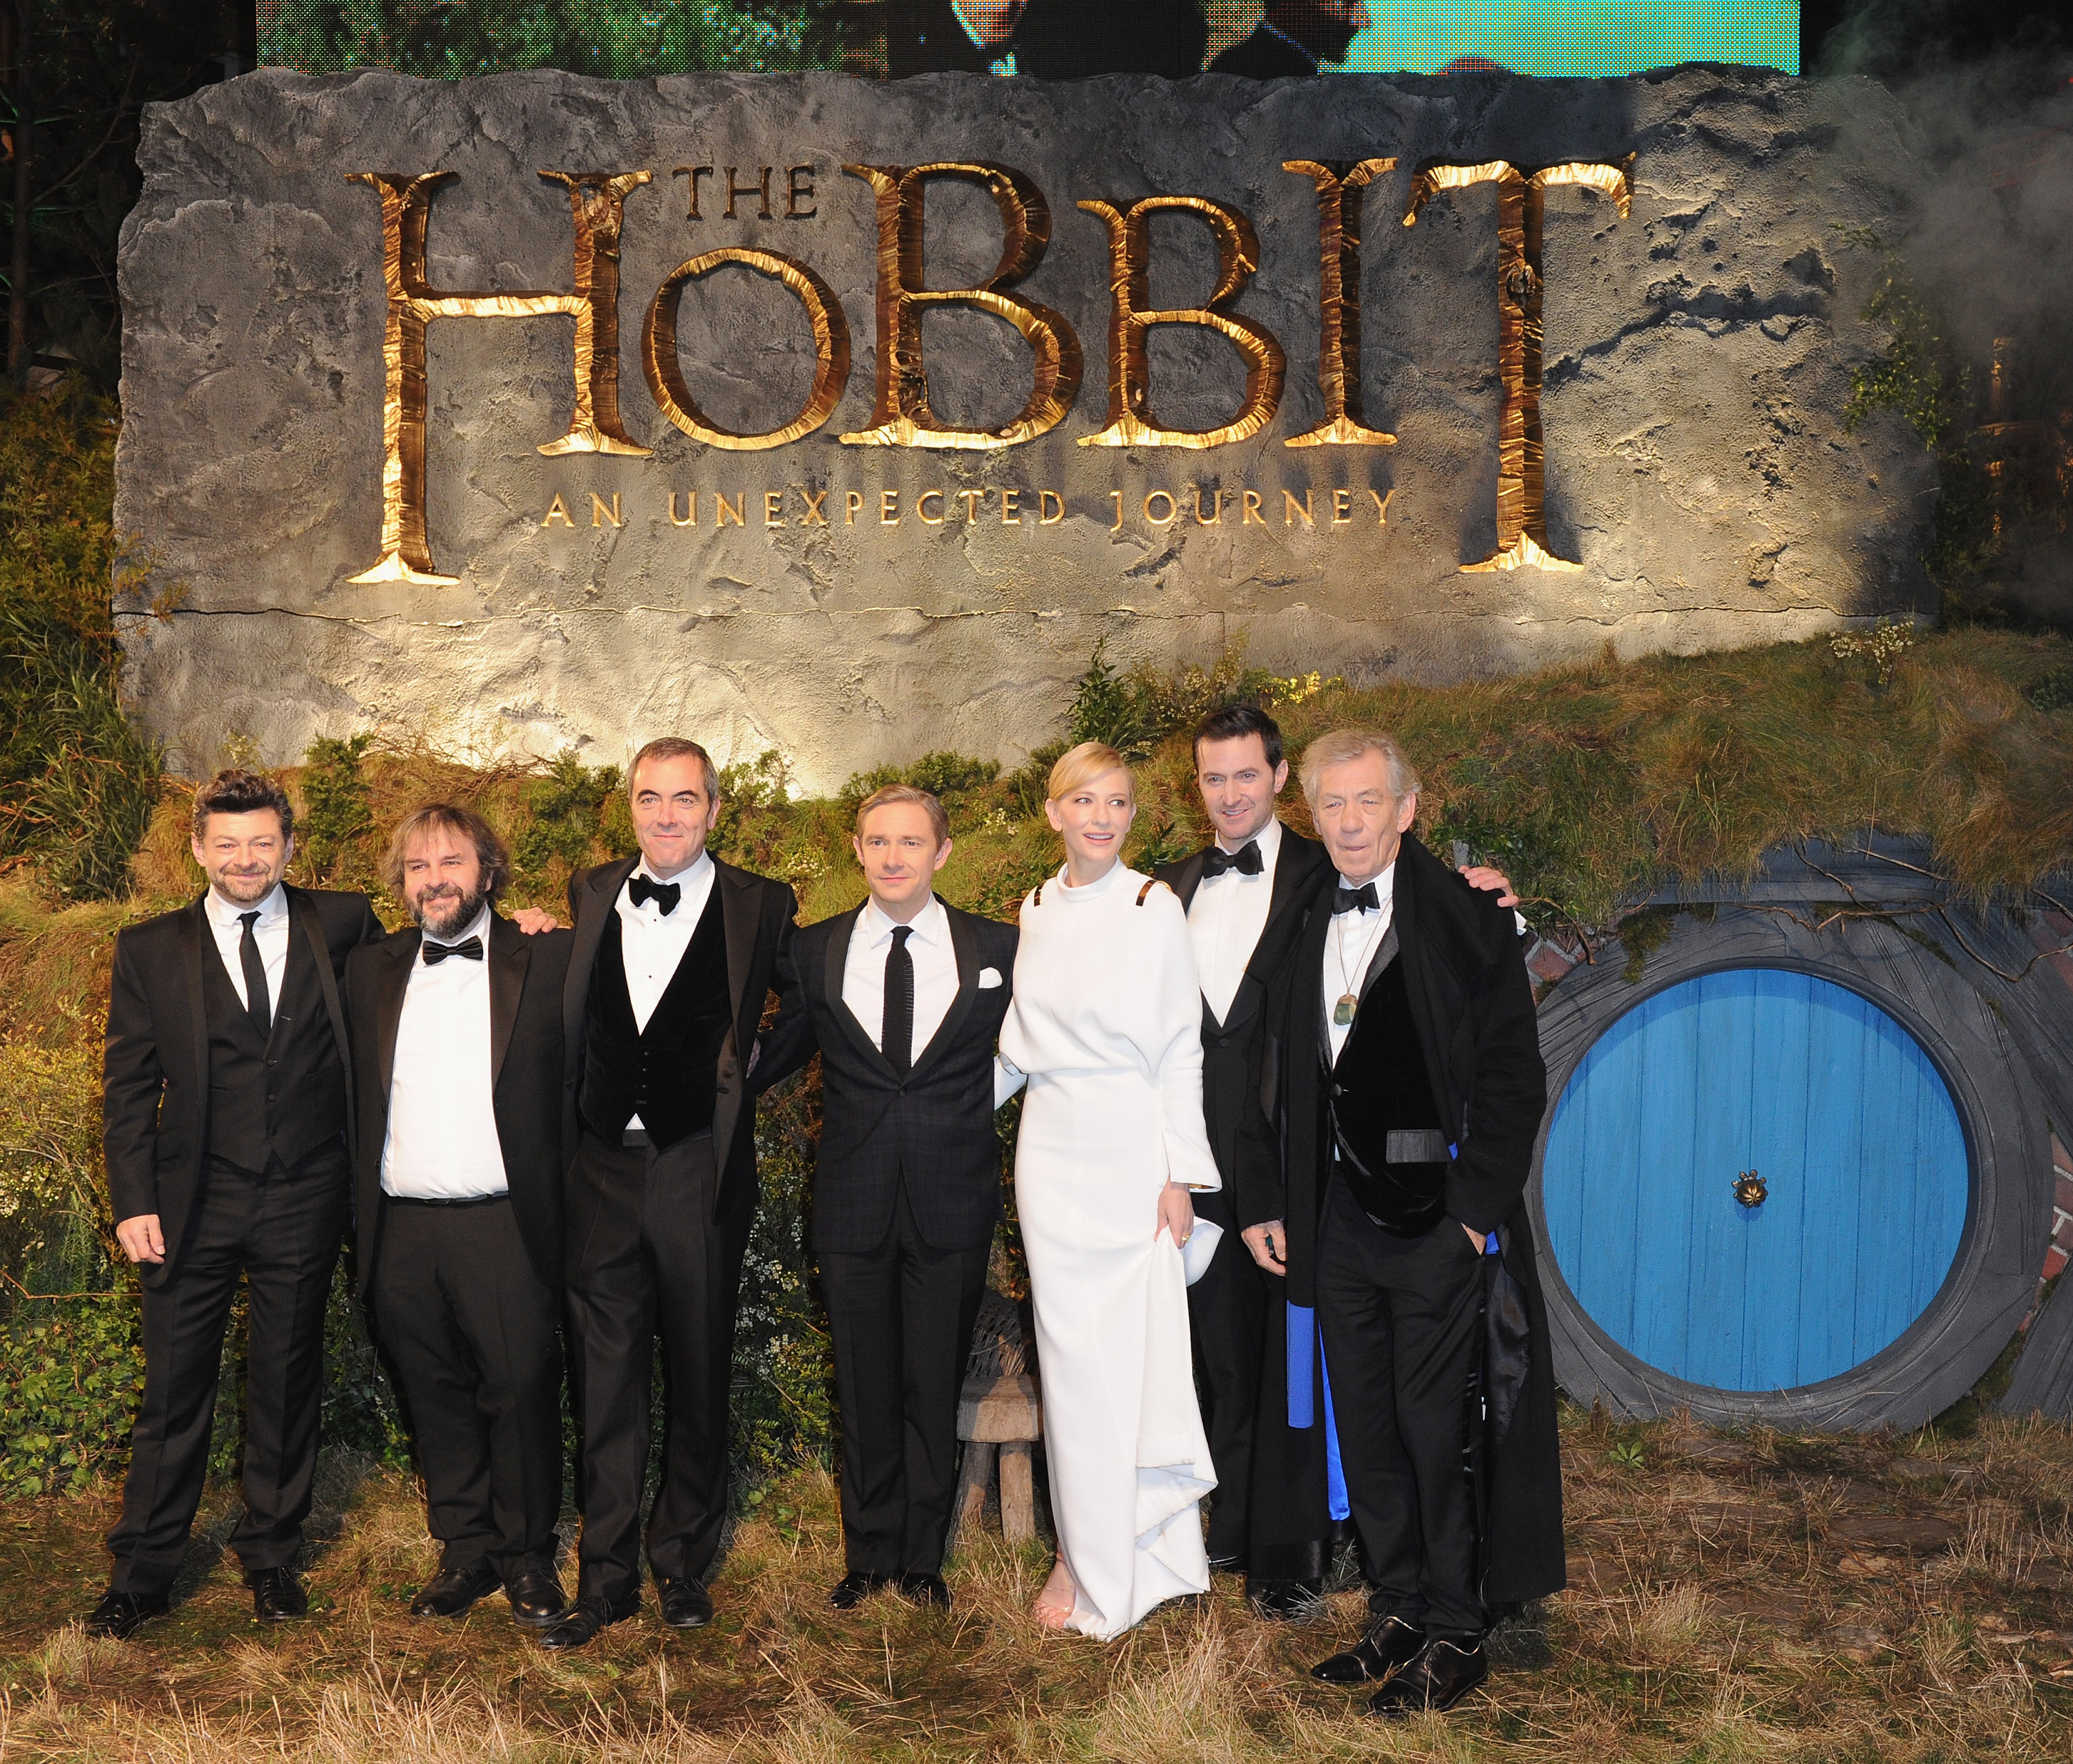 the hobbit an unexpected journey cast and characters